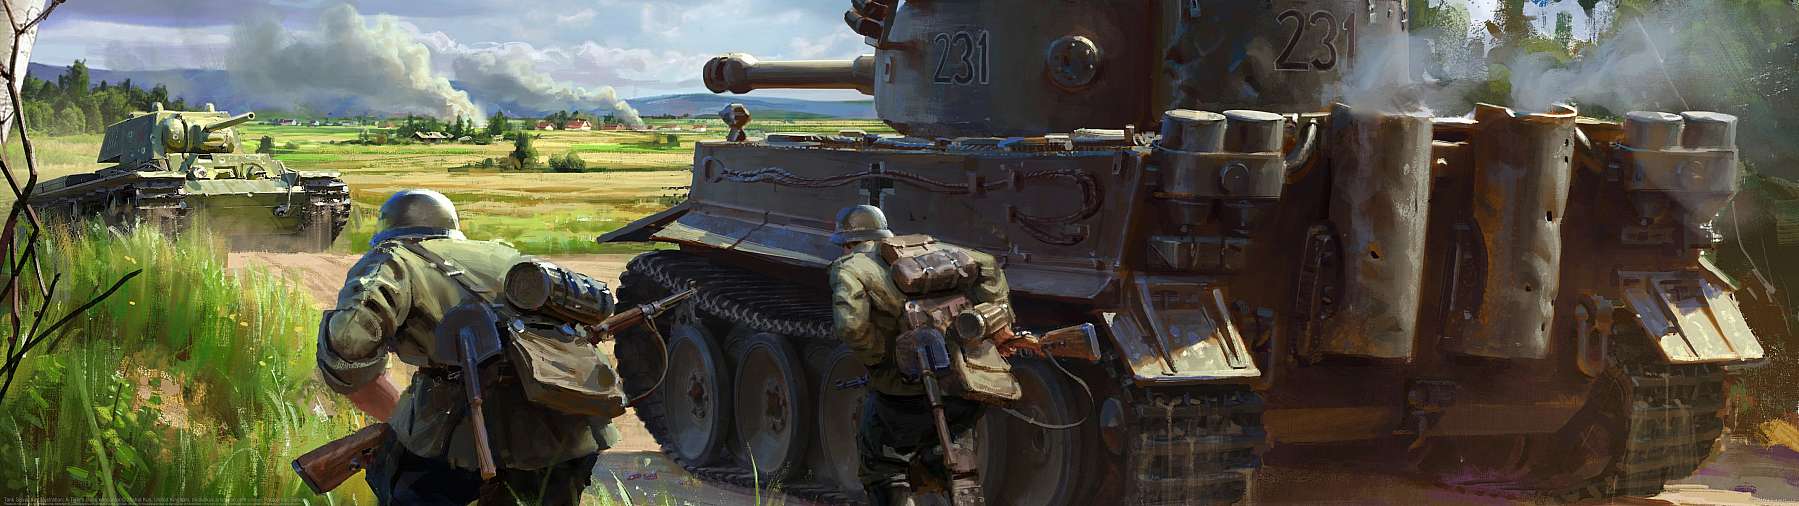 Tank Squad key illustration: A Tiger's close encounter ultrawide achtergrond